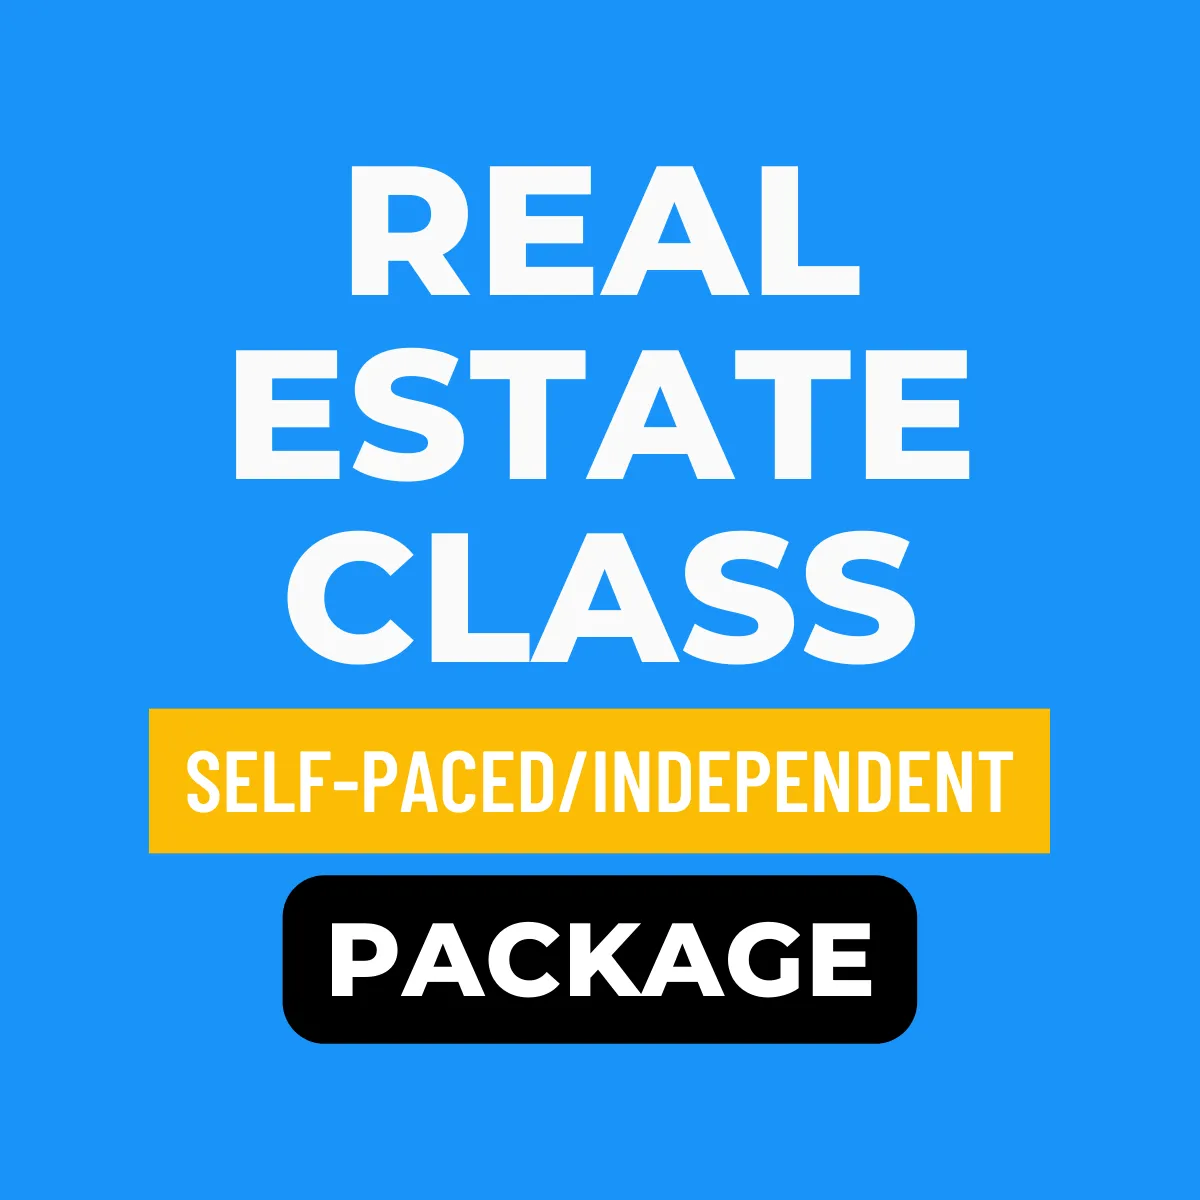 Maryland Real Estate Course - Self-paced| Independent Study| At your own pace (PACKAGE)